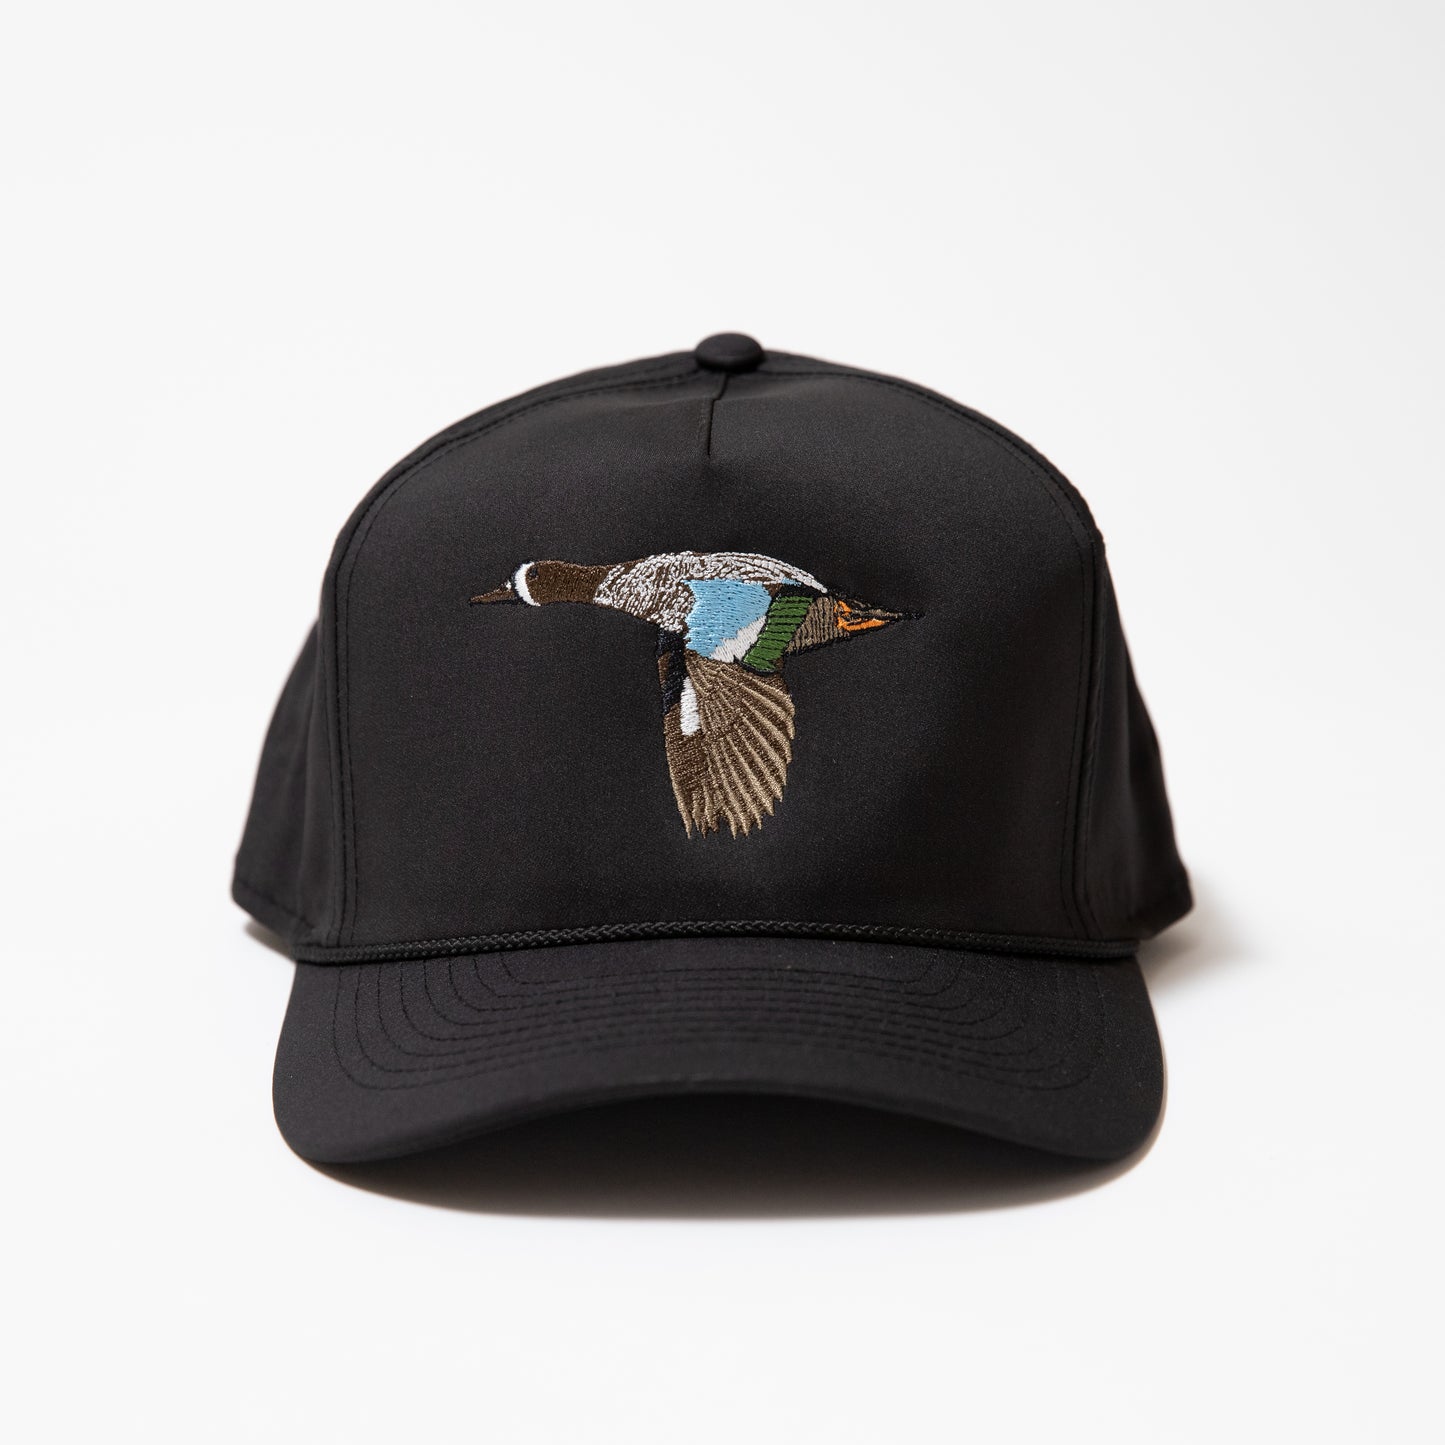 black hat with blue wing teal duck embroidered on the front and a black woven rope along the base